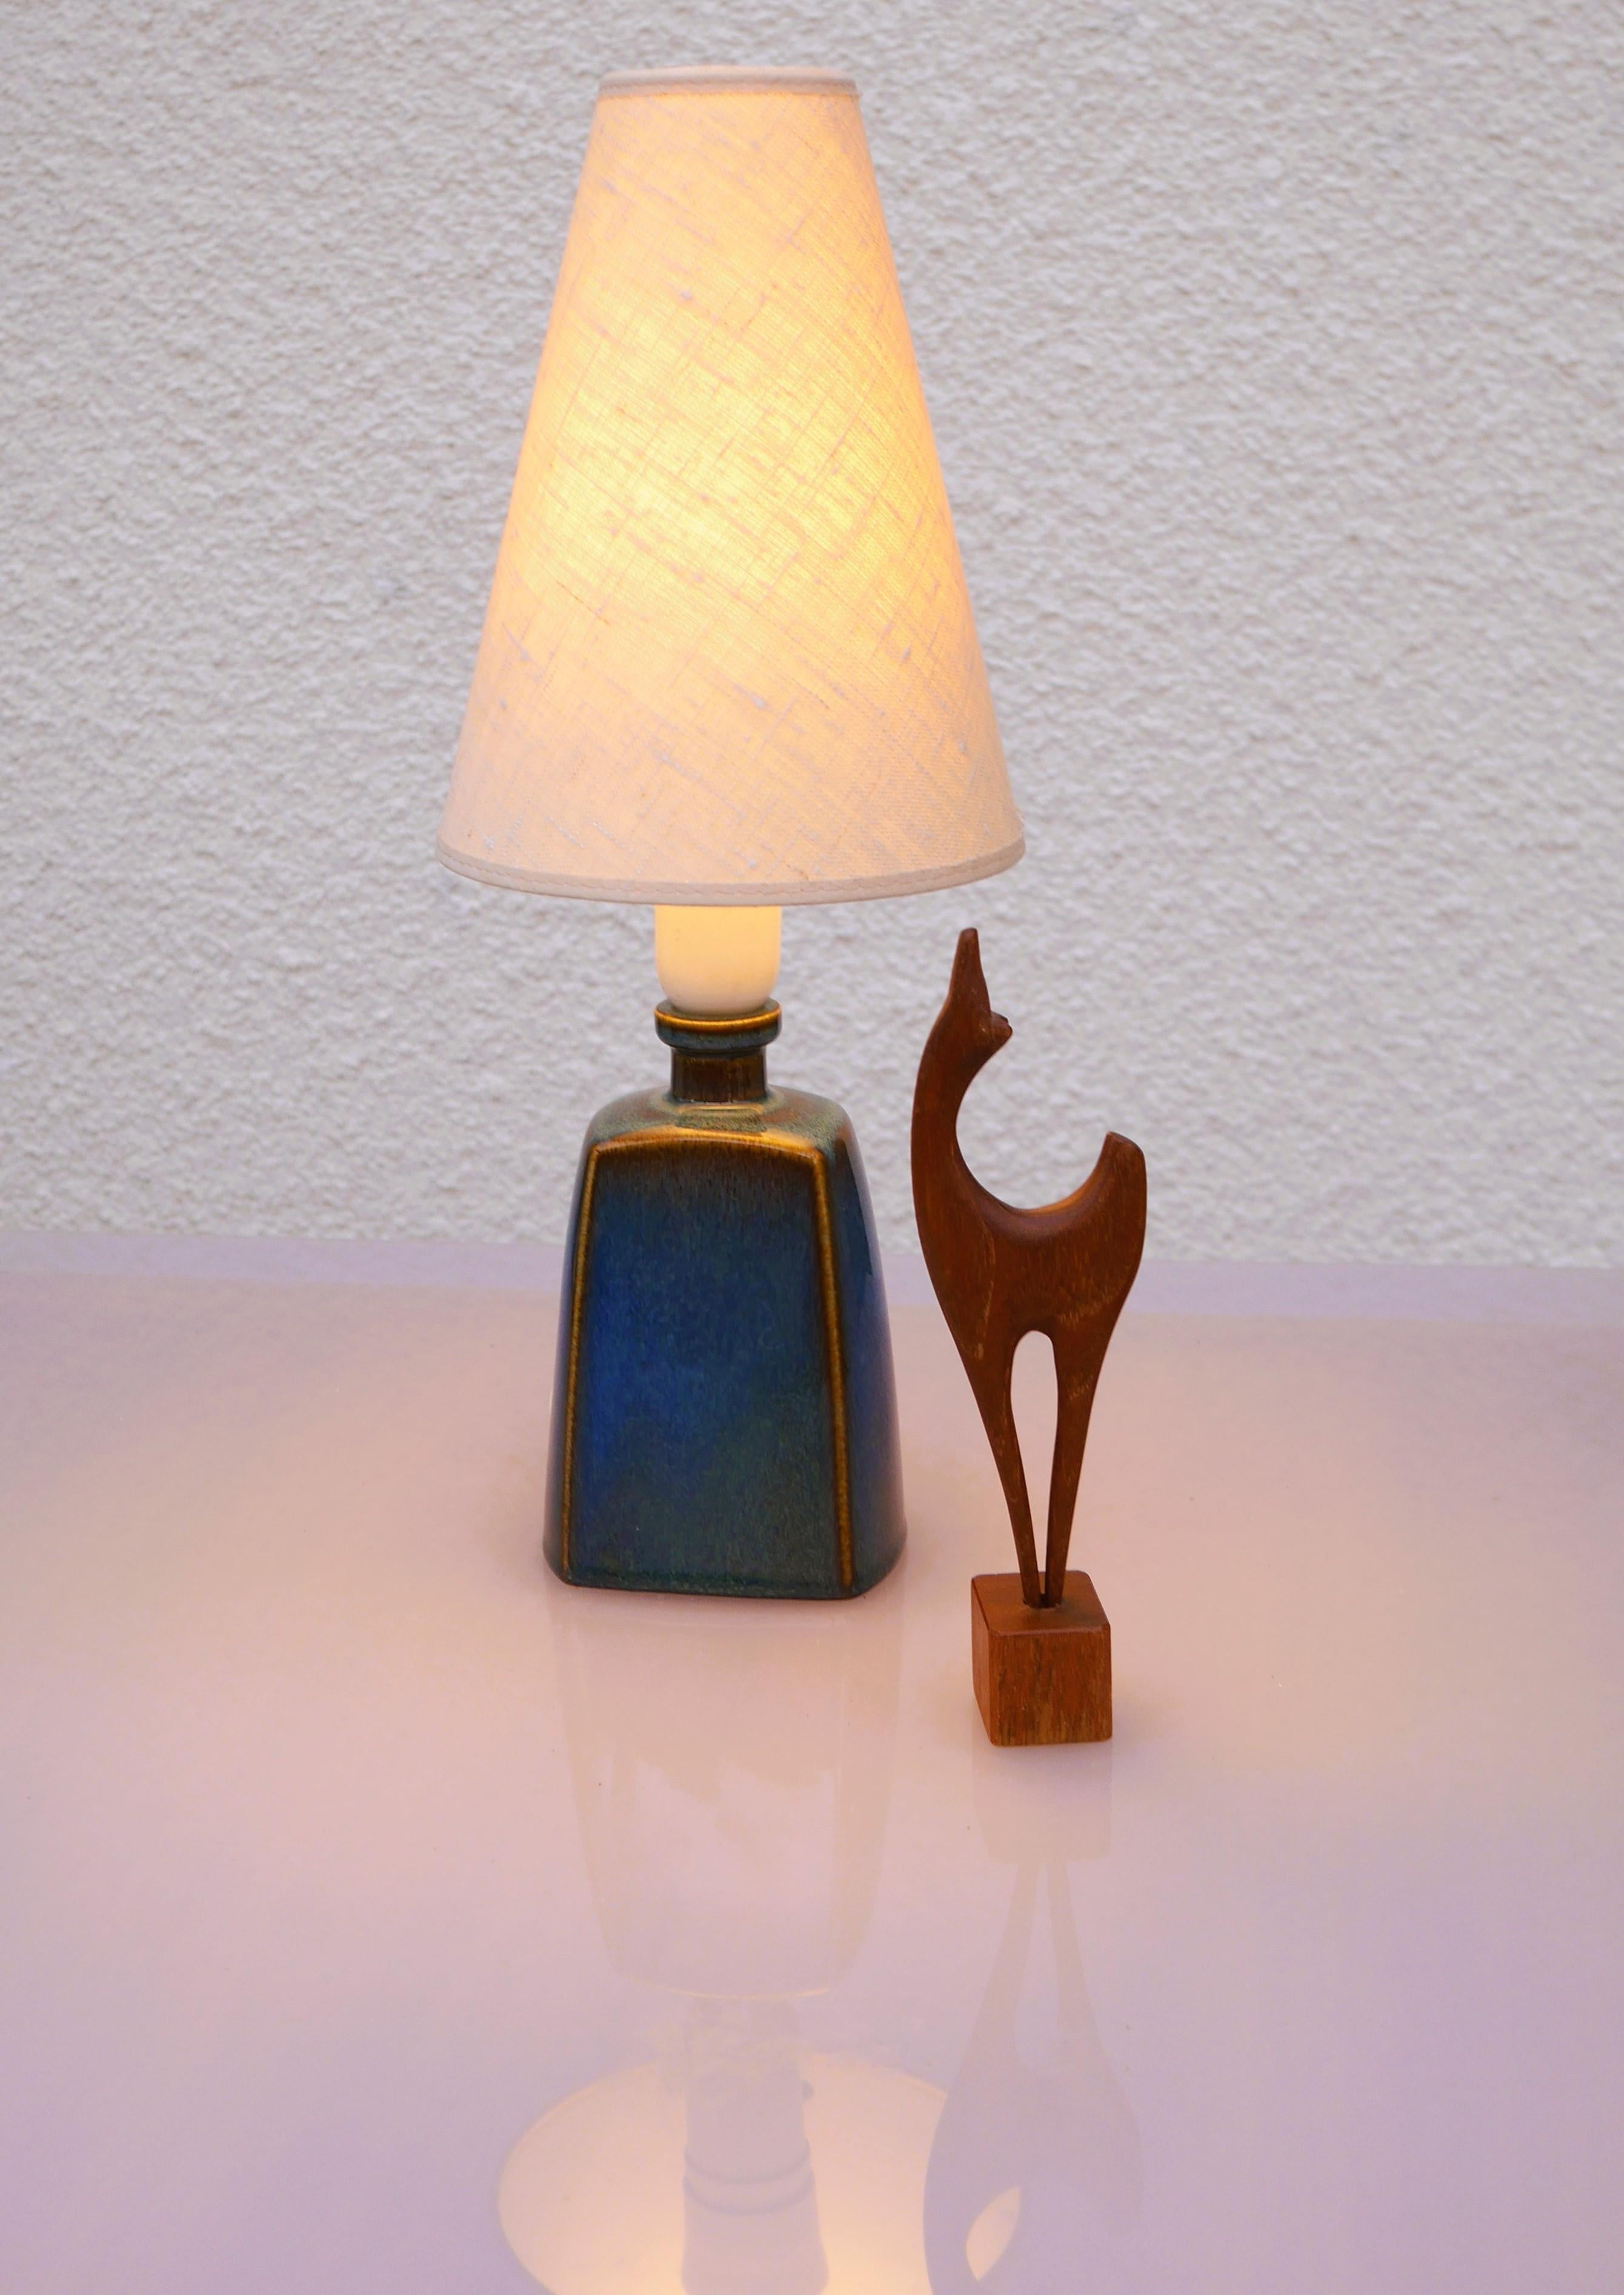 Ceramic Mid-century modern pottery lamp base, known as 